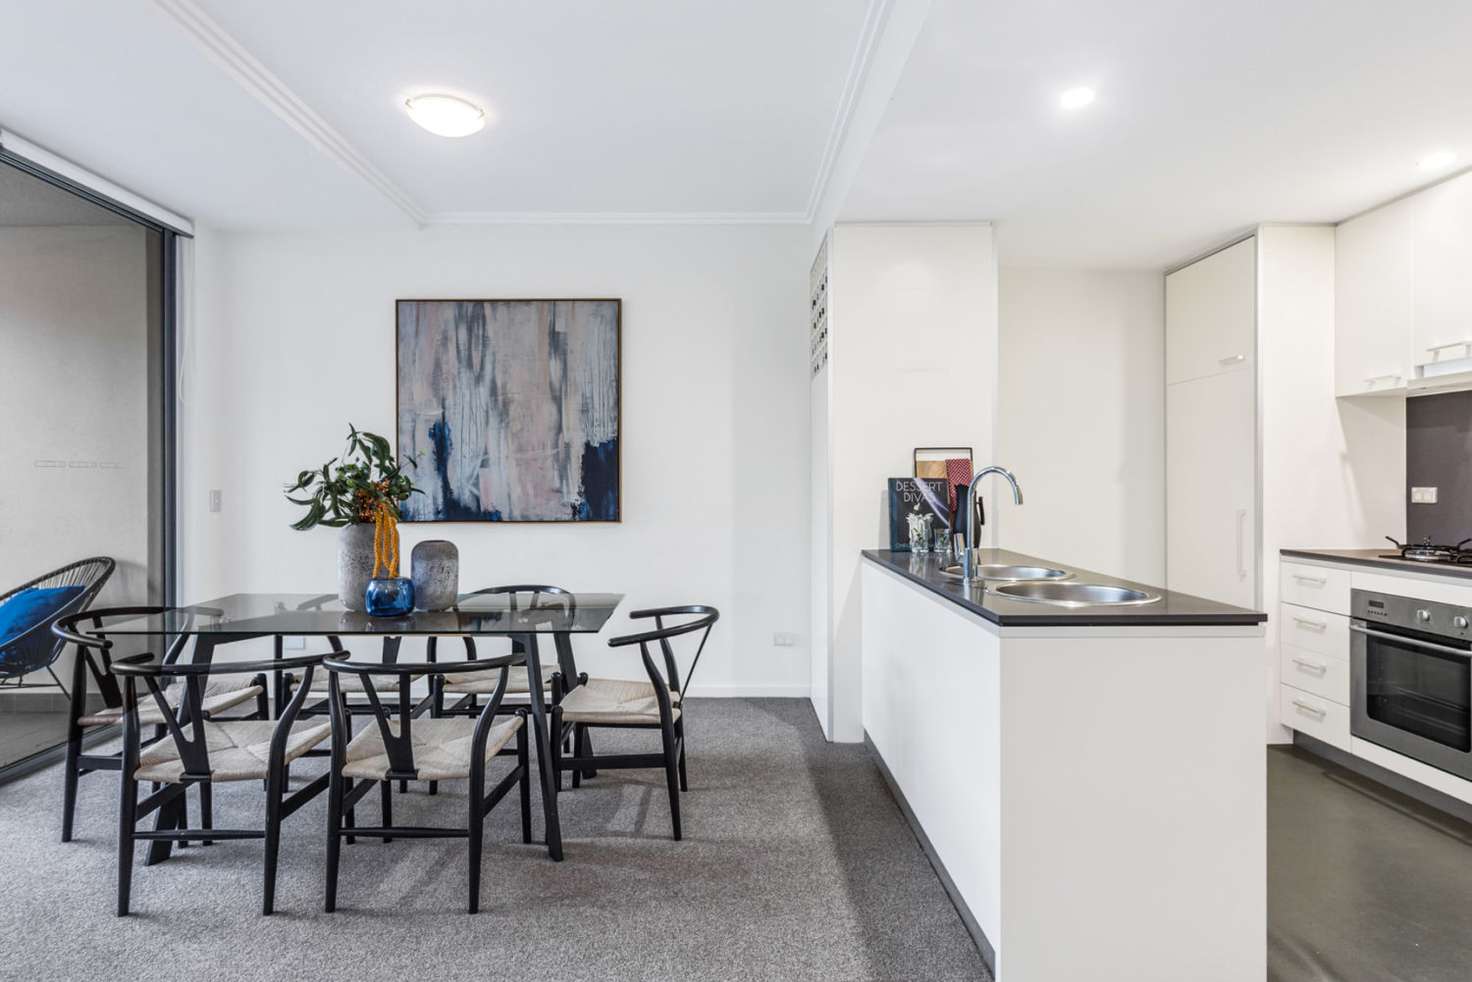 Main view of Homely apartment listing, 83/249-259 Chalmers St, Redfern NSW 2016